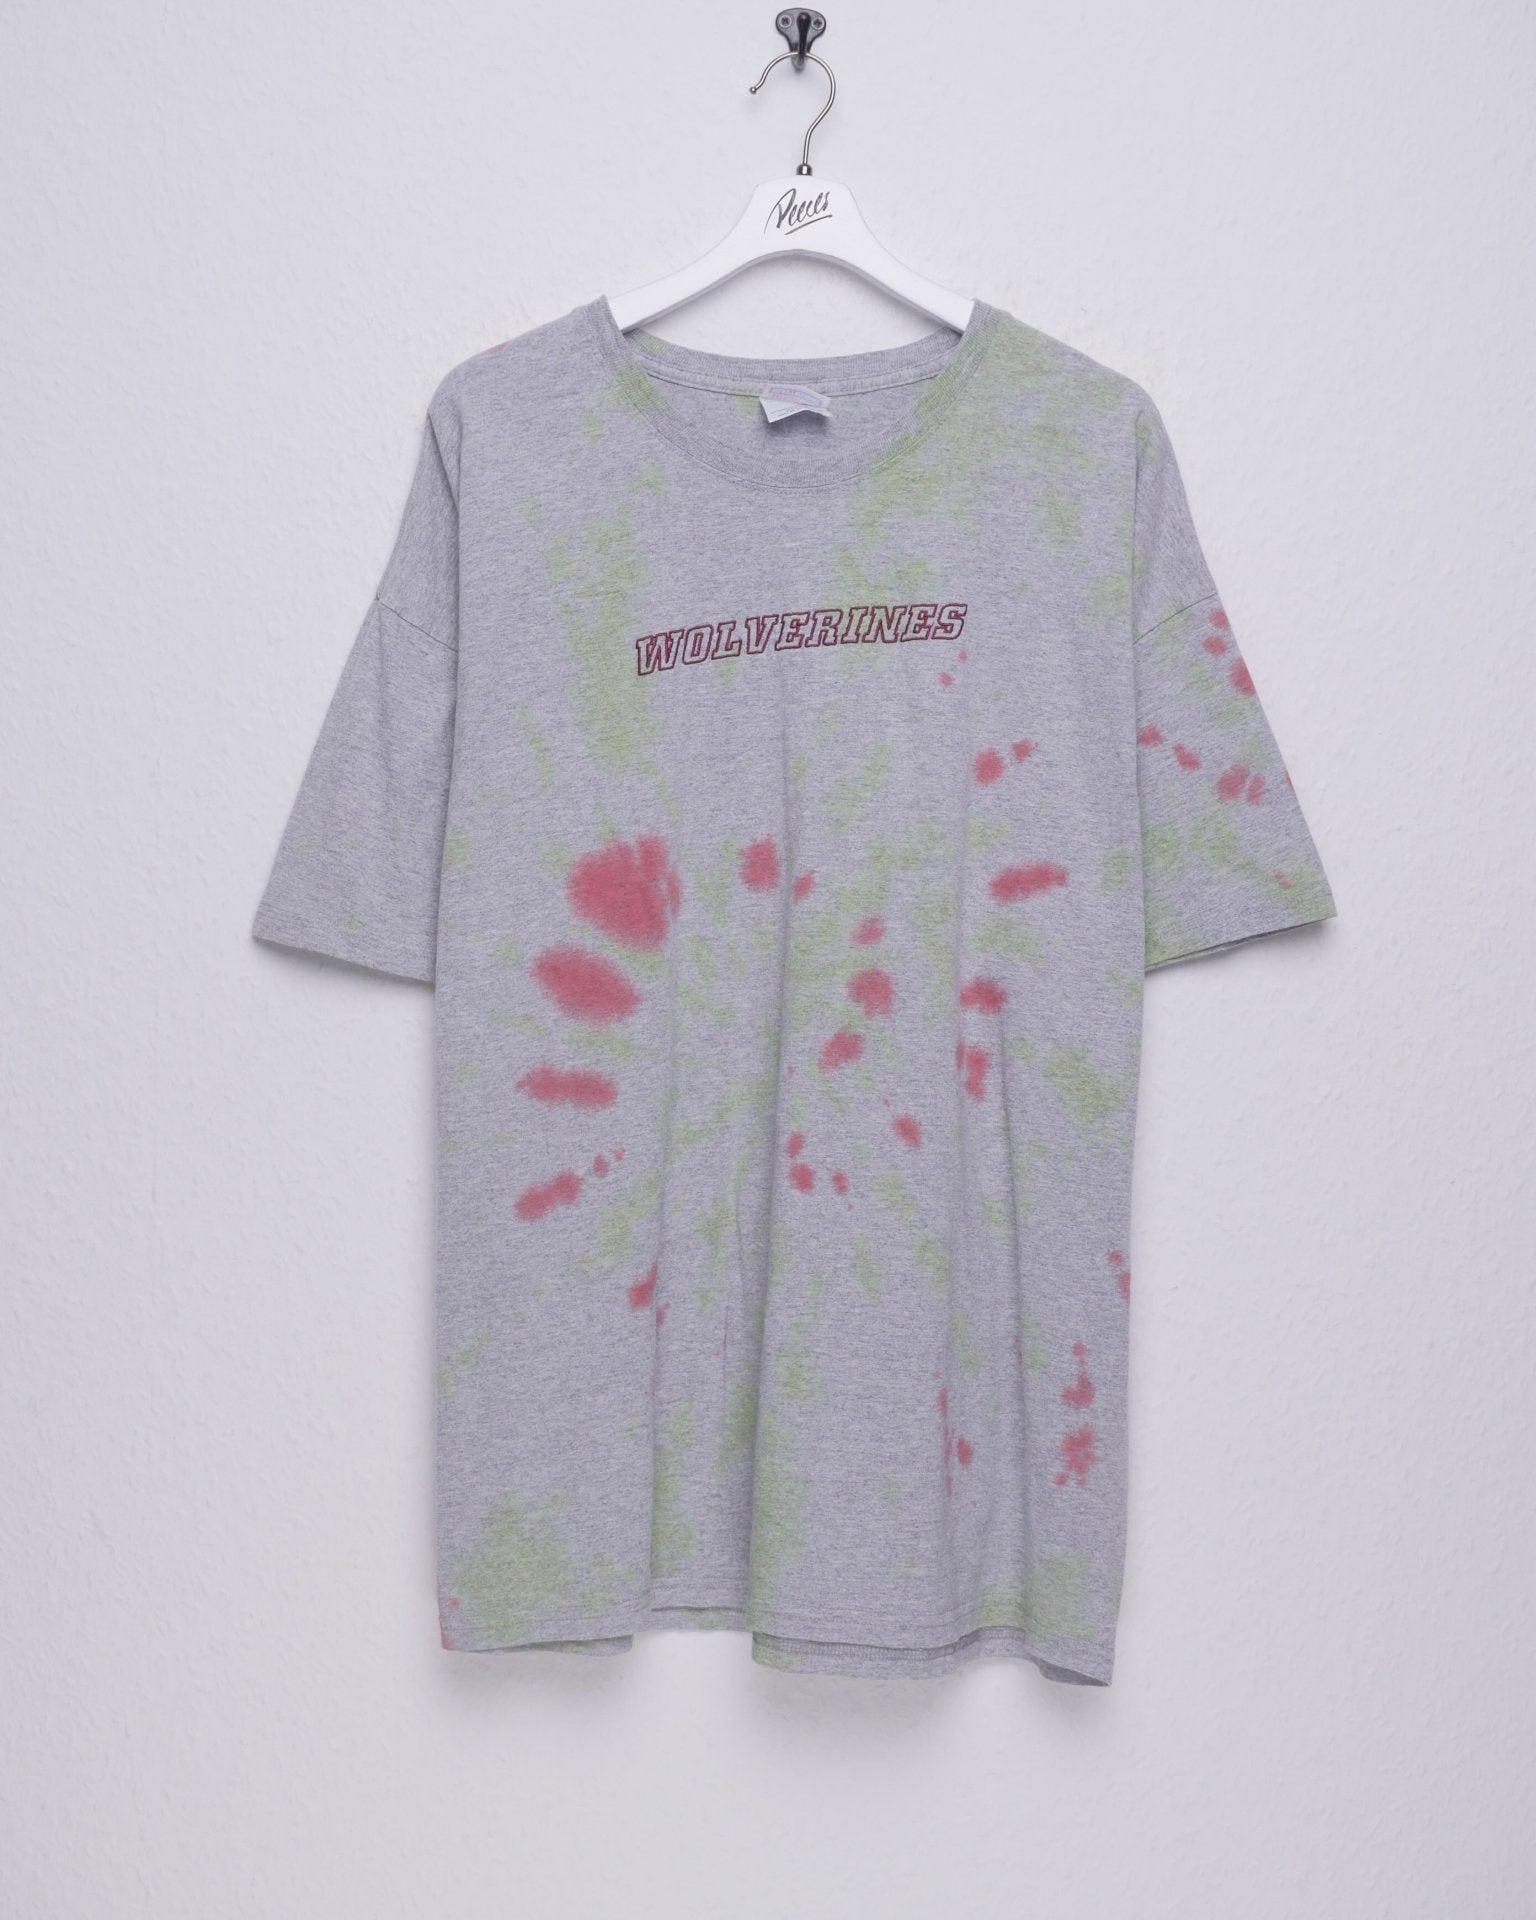 Wolverines Spellout embroidered grey oversized Tie Dye Shirt - Peeces